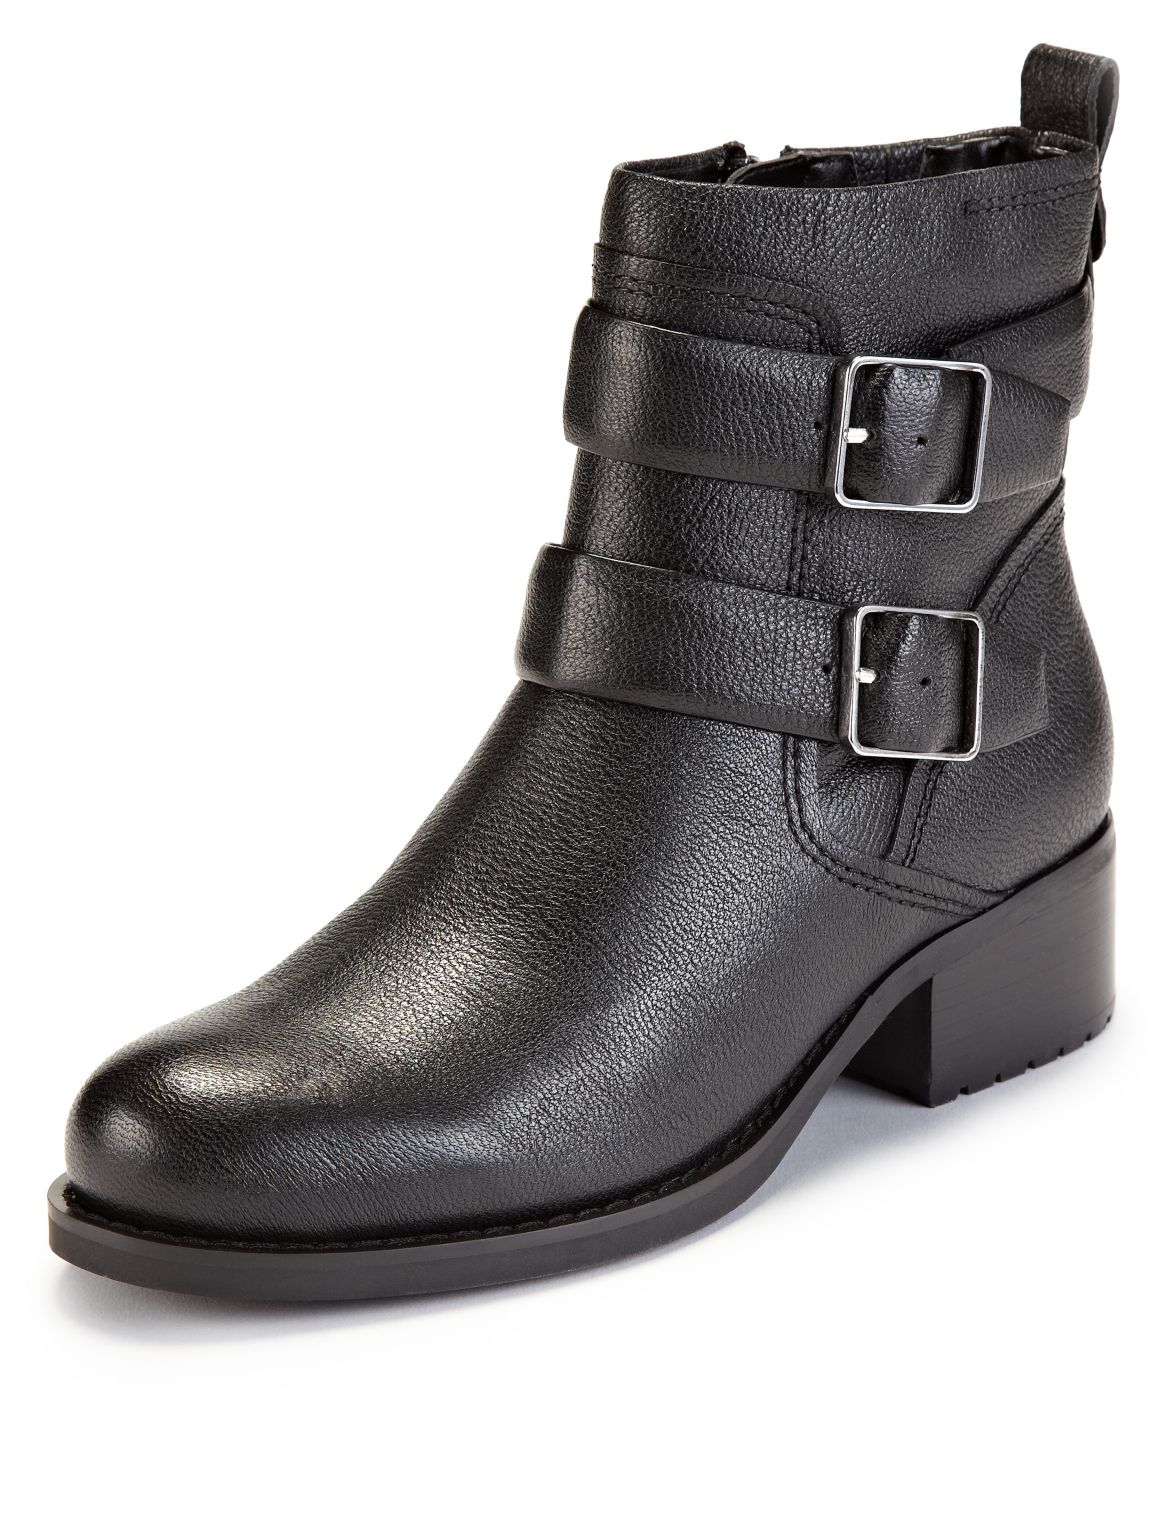 Leather Stain Awayâ ¢ Two Strap Biker Boots With Insolia FlexÂ® Black ...